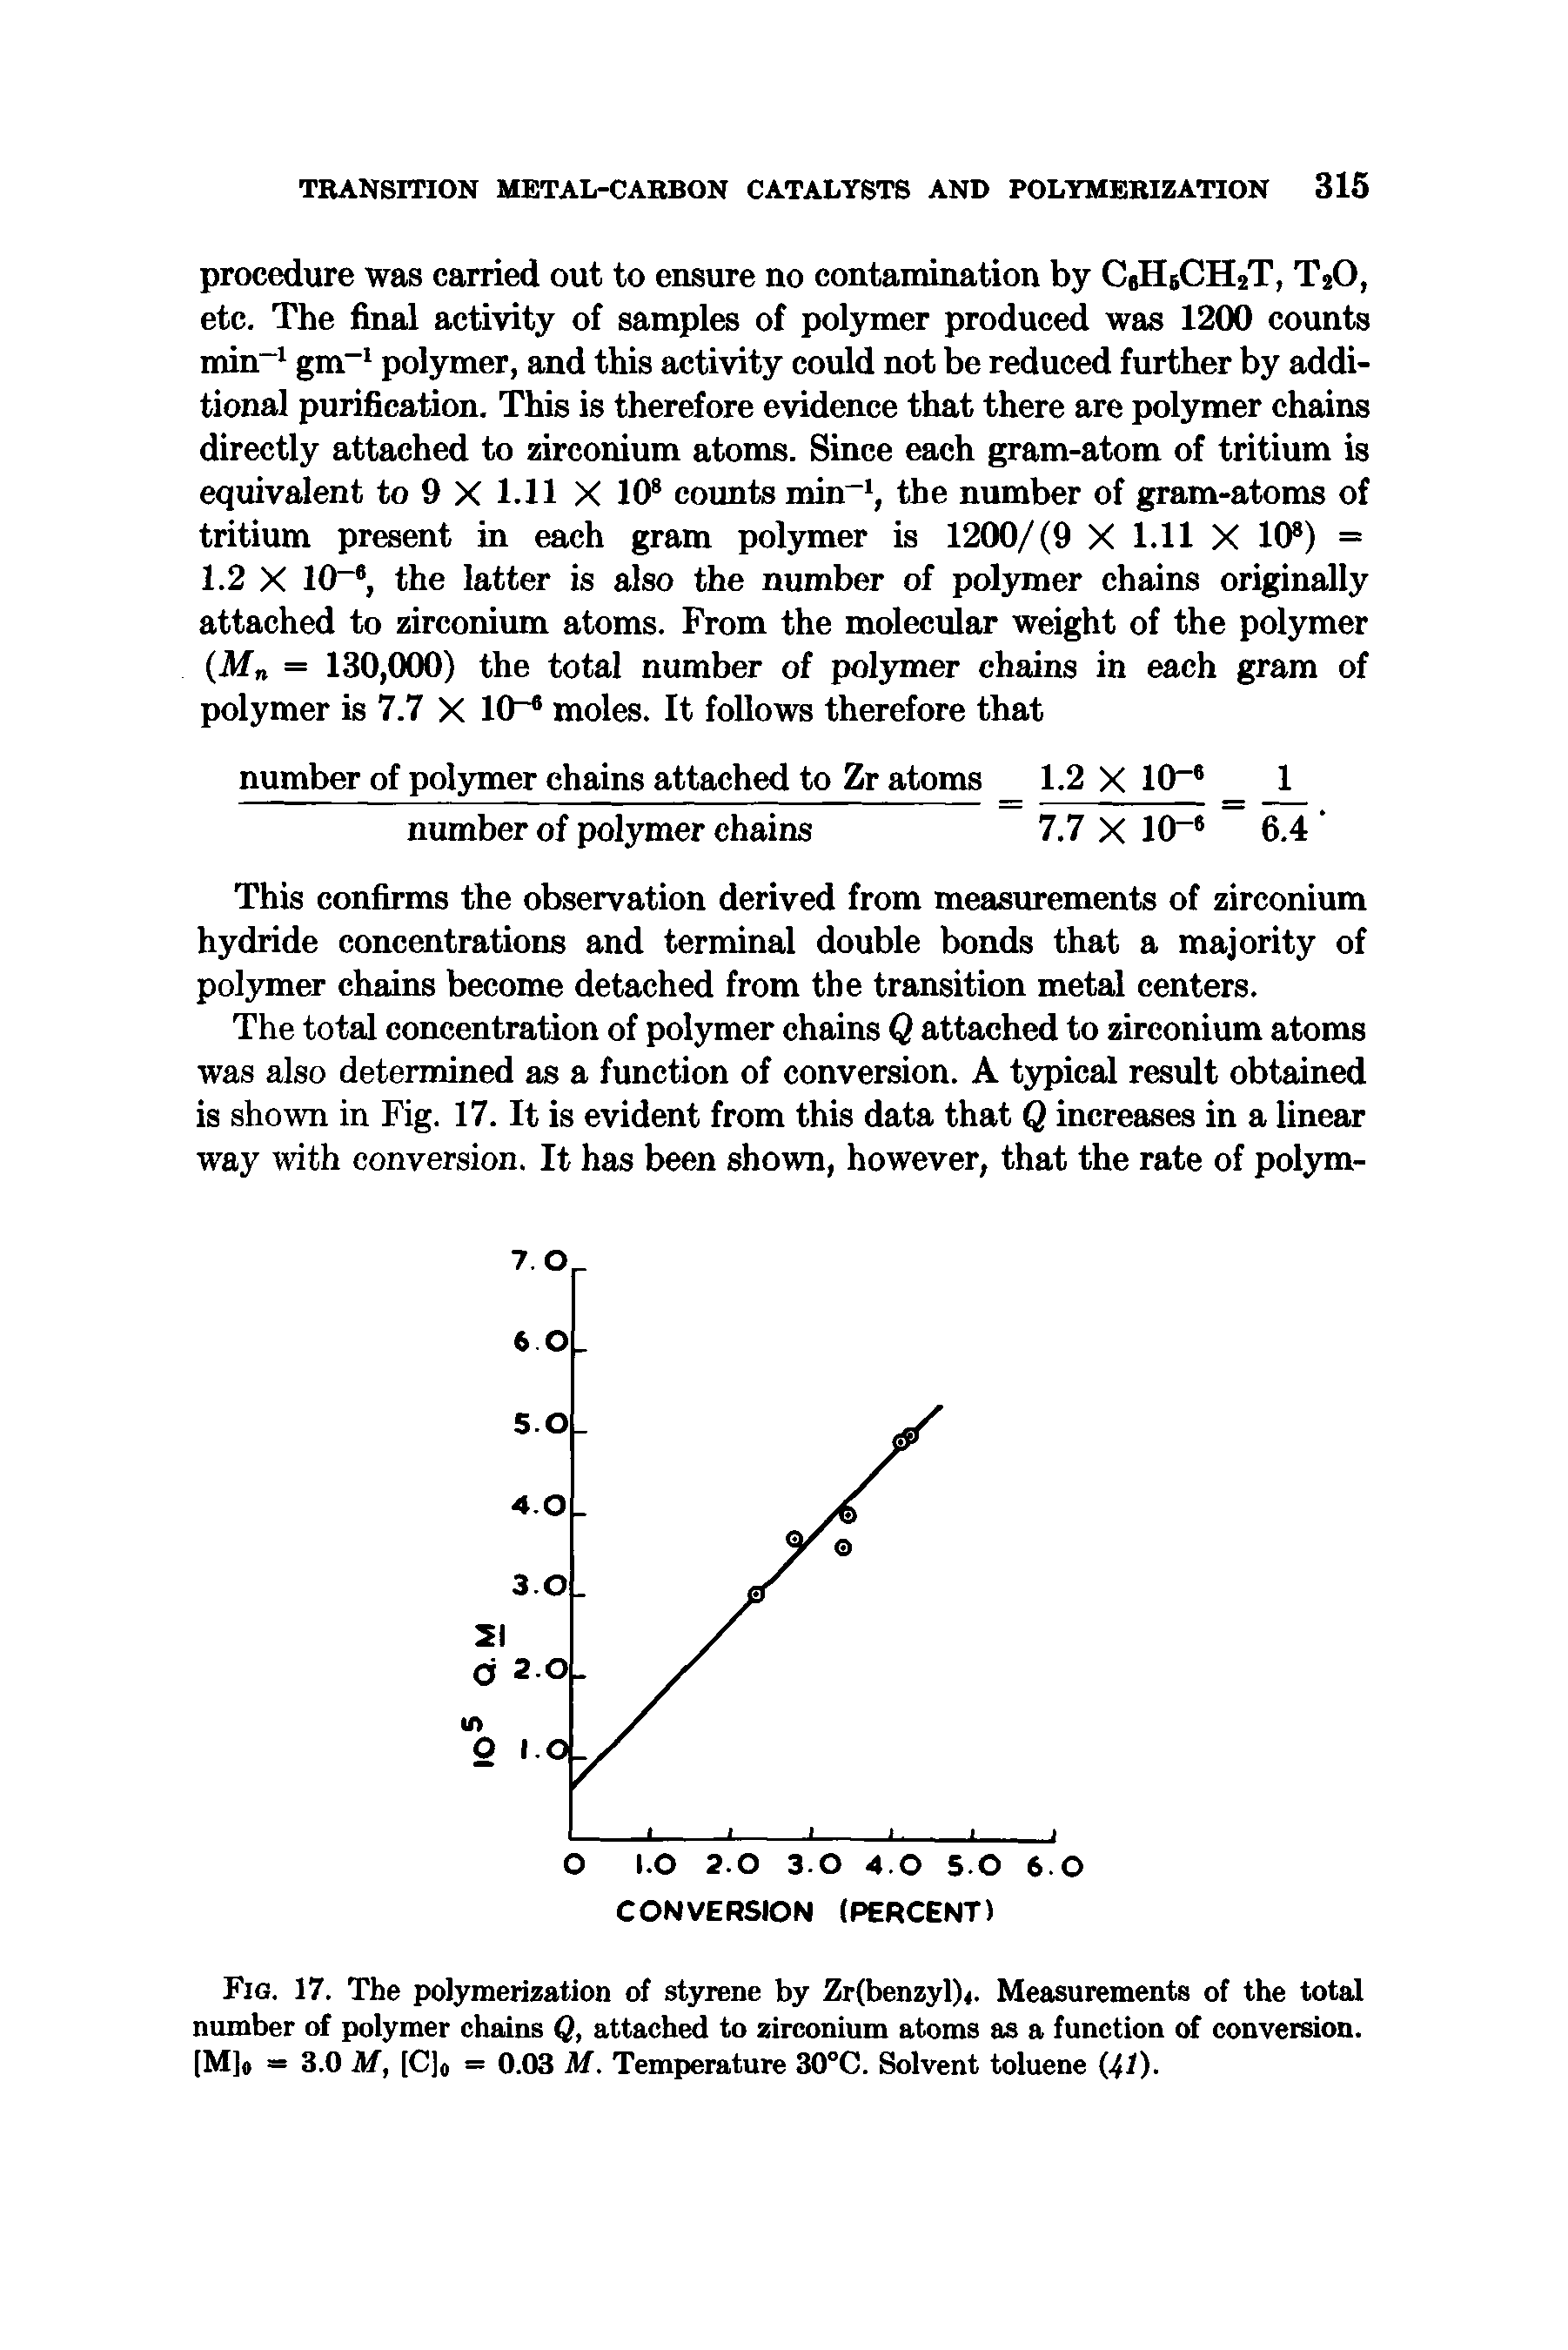 Fig. 17. The polymerization of styrene by Zr(benzyl)4. Measurements of the total number of polymer chains Q, attached to zirconium atoms as a function of conversion. [M]o = 3.0 M, [C]o = 0.03 M. Temperature 30°C. Solvent toluene W).